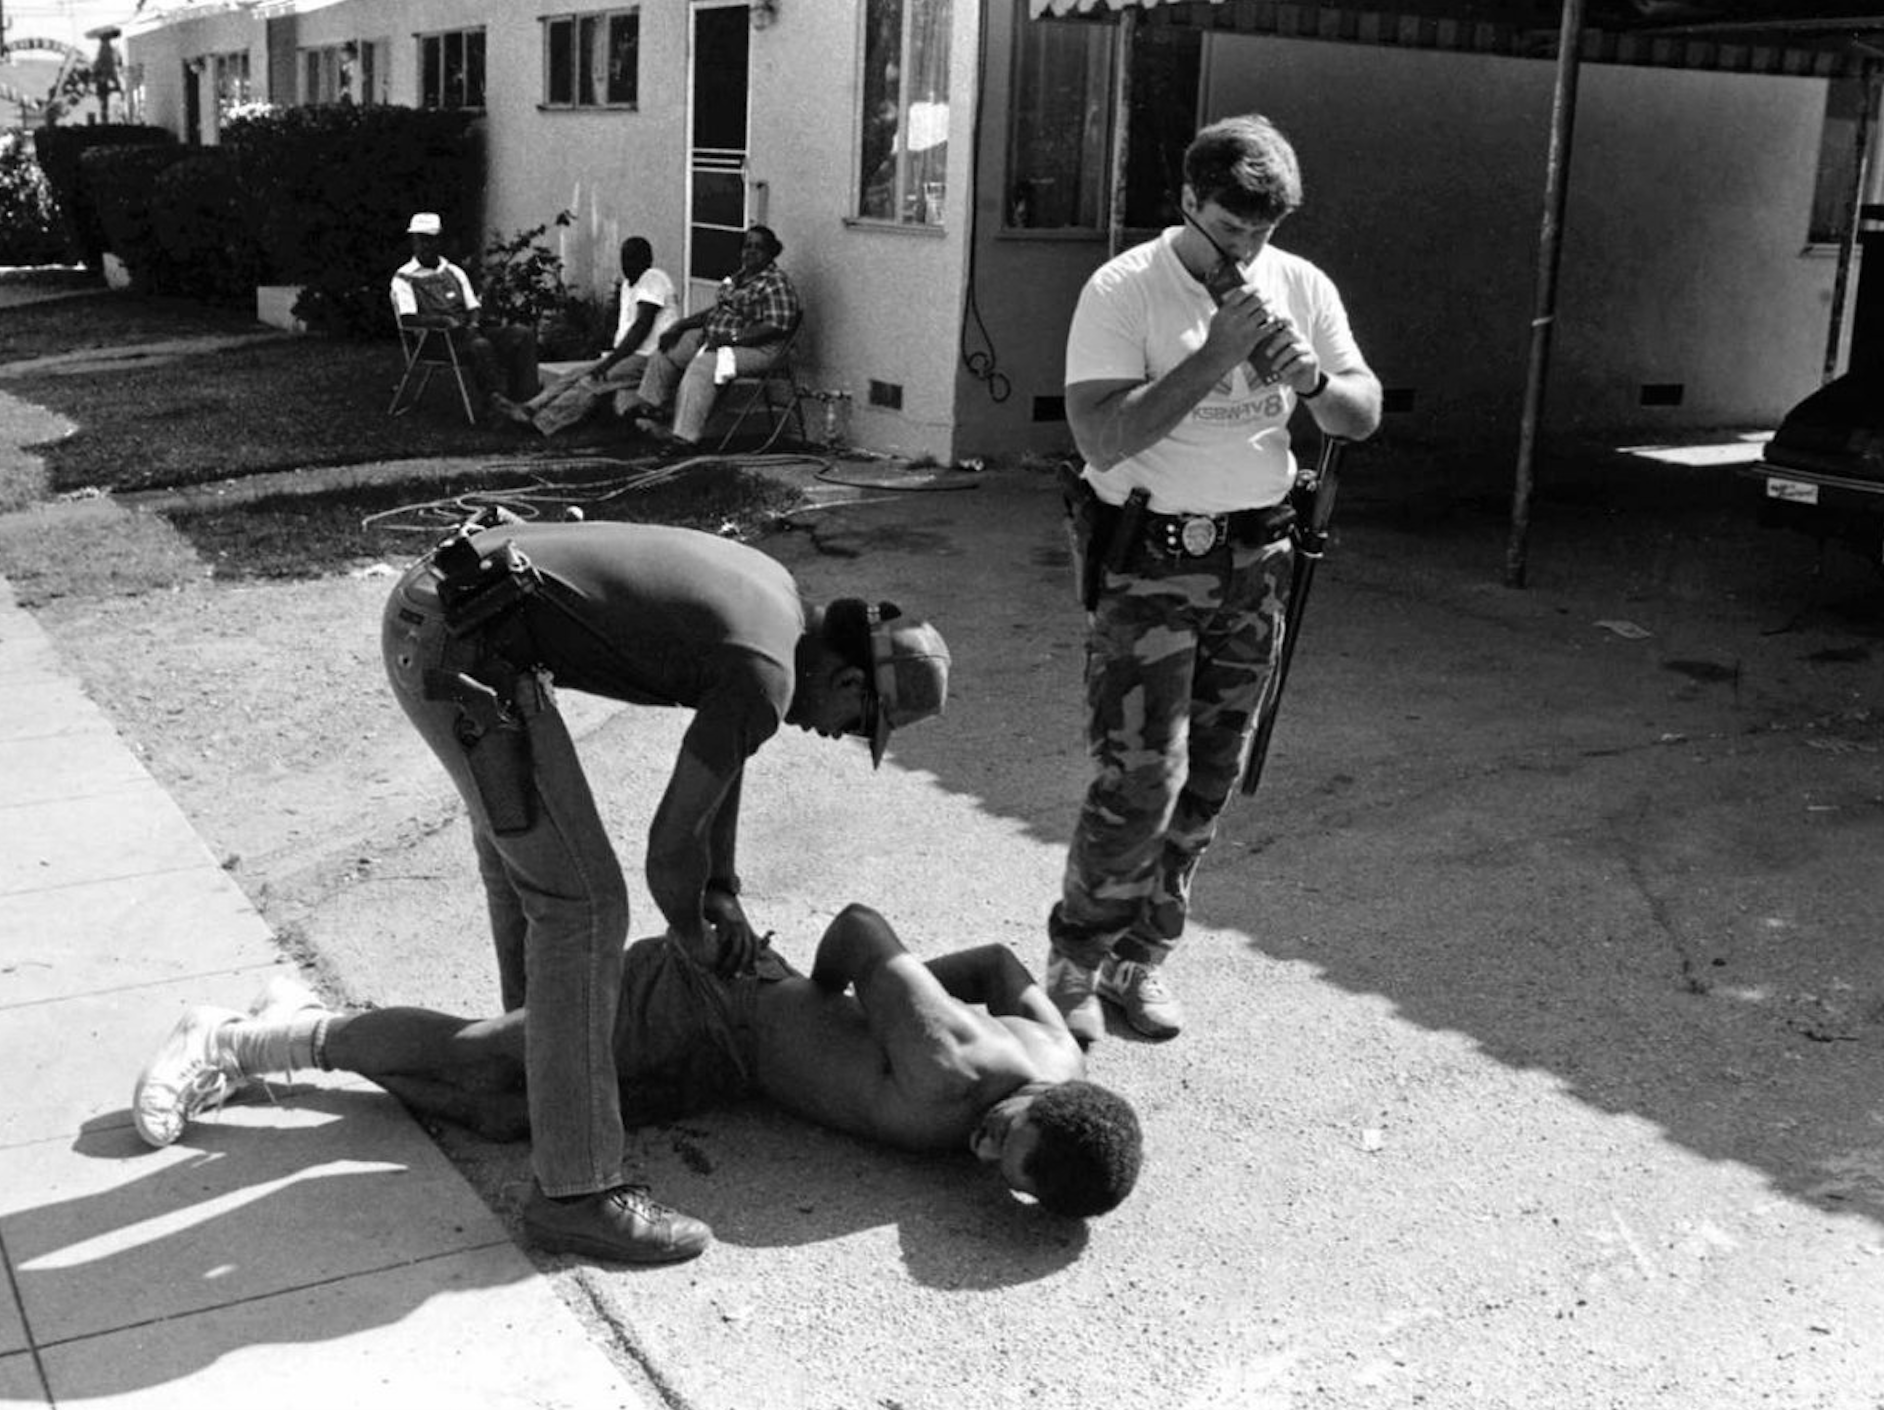 Two Pasadena police officers arrest a man suspected of selling crack-cocaine in mid 1980s Los Angeles. Source: Business Insider, William Karl Valentine